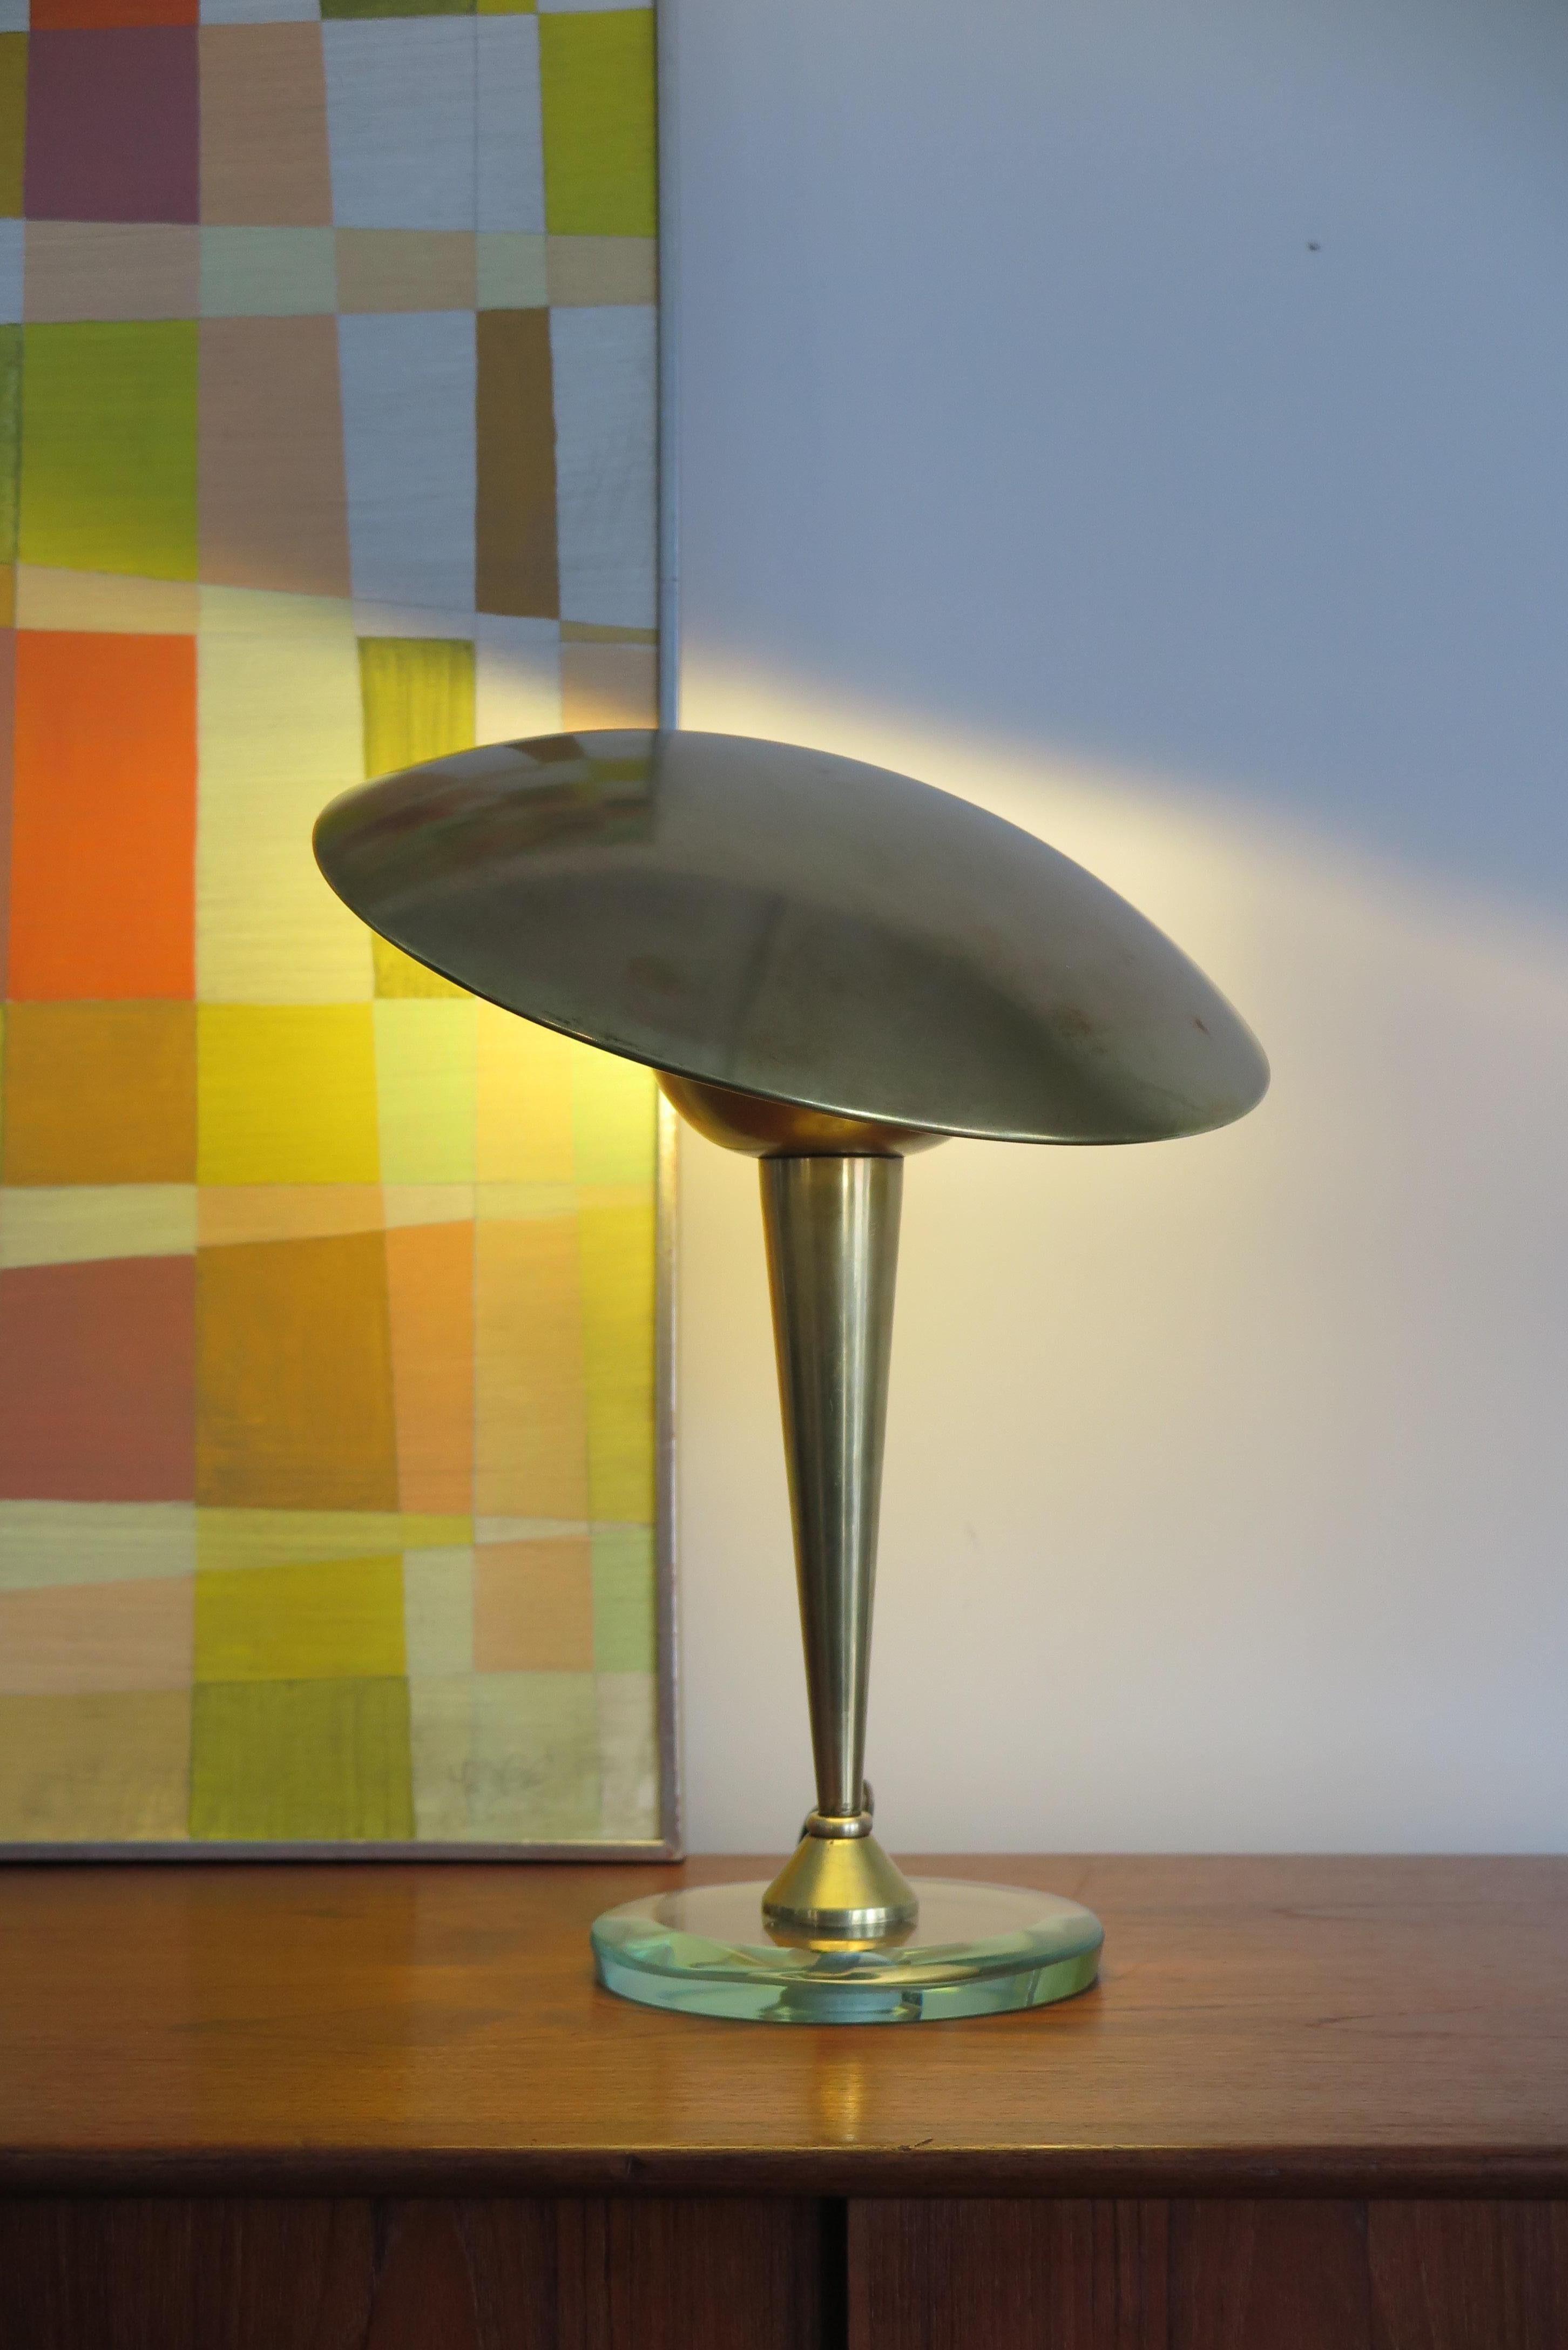 1950s Italian brass Stilnovo (attributed) table or desk lamp with bevelled crystal base and adjustable round brass shade.

Please note that the lamps is original of the period and this shows normal signs of age and use.